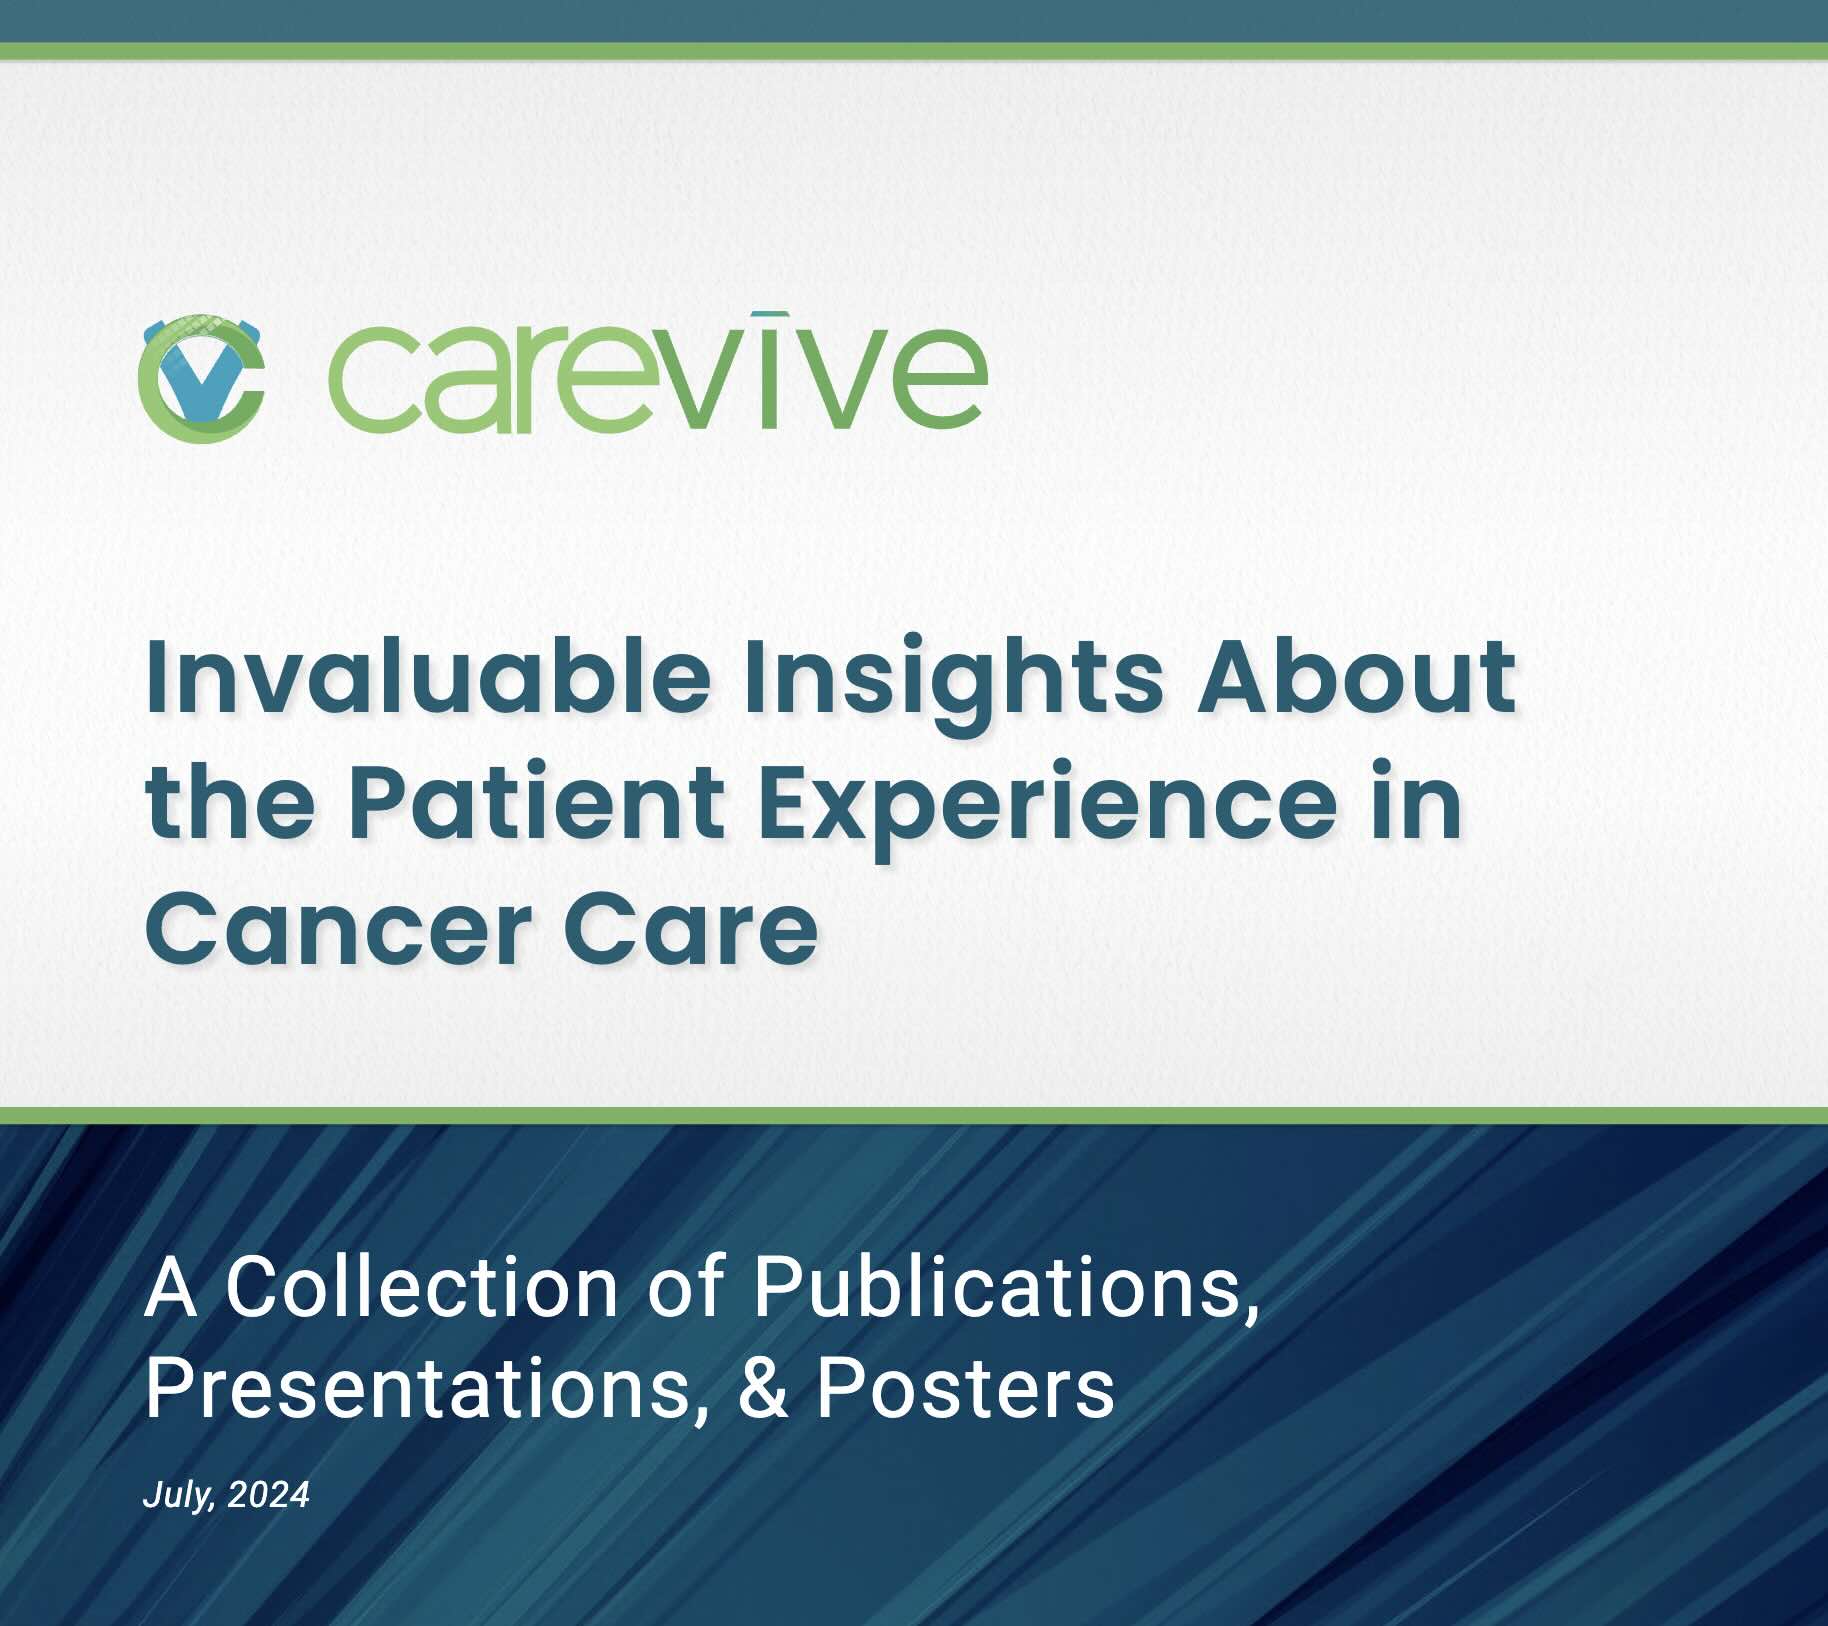 Invaluable Oncology Insights - Carevive